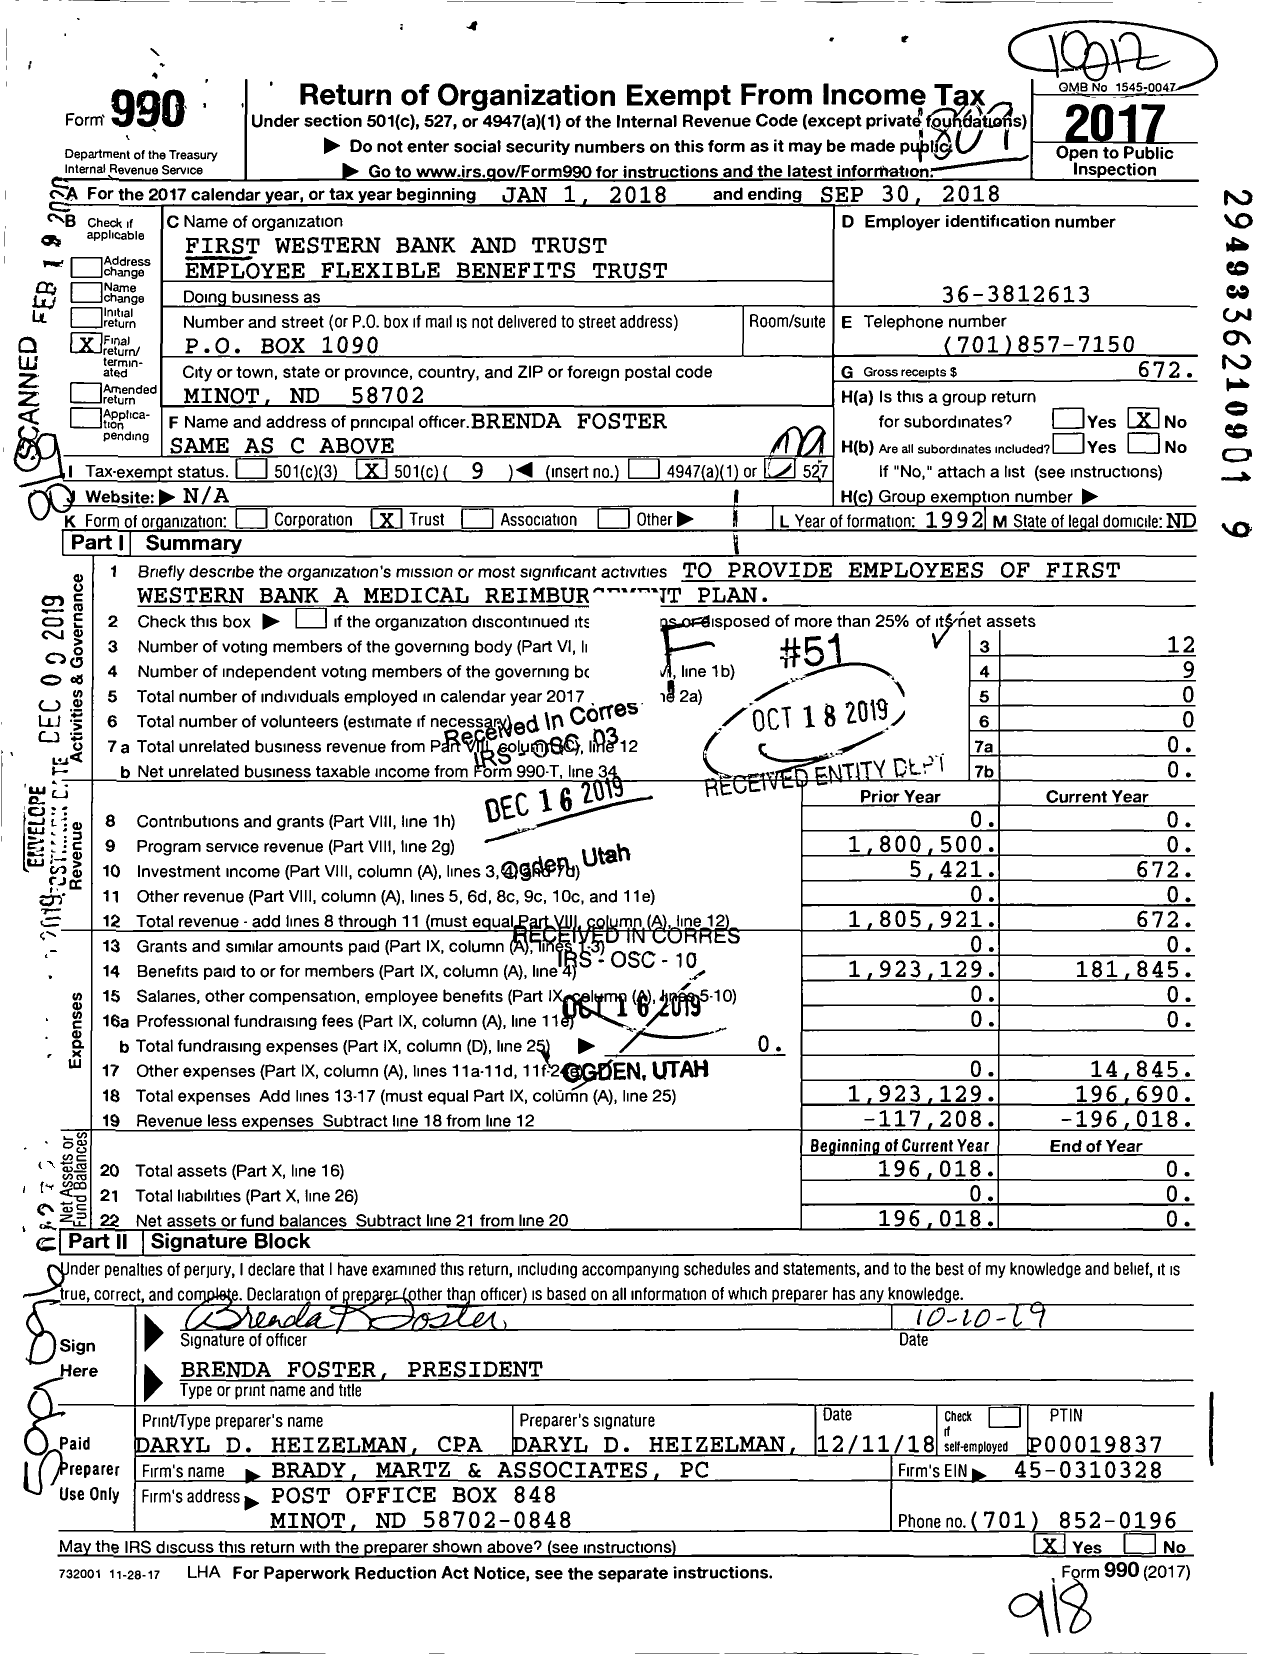 Image of first page of 2017 Form 990O for First Western Bank and Trust Employee Flexible Benefits Trust